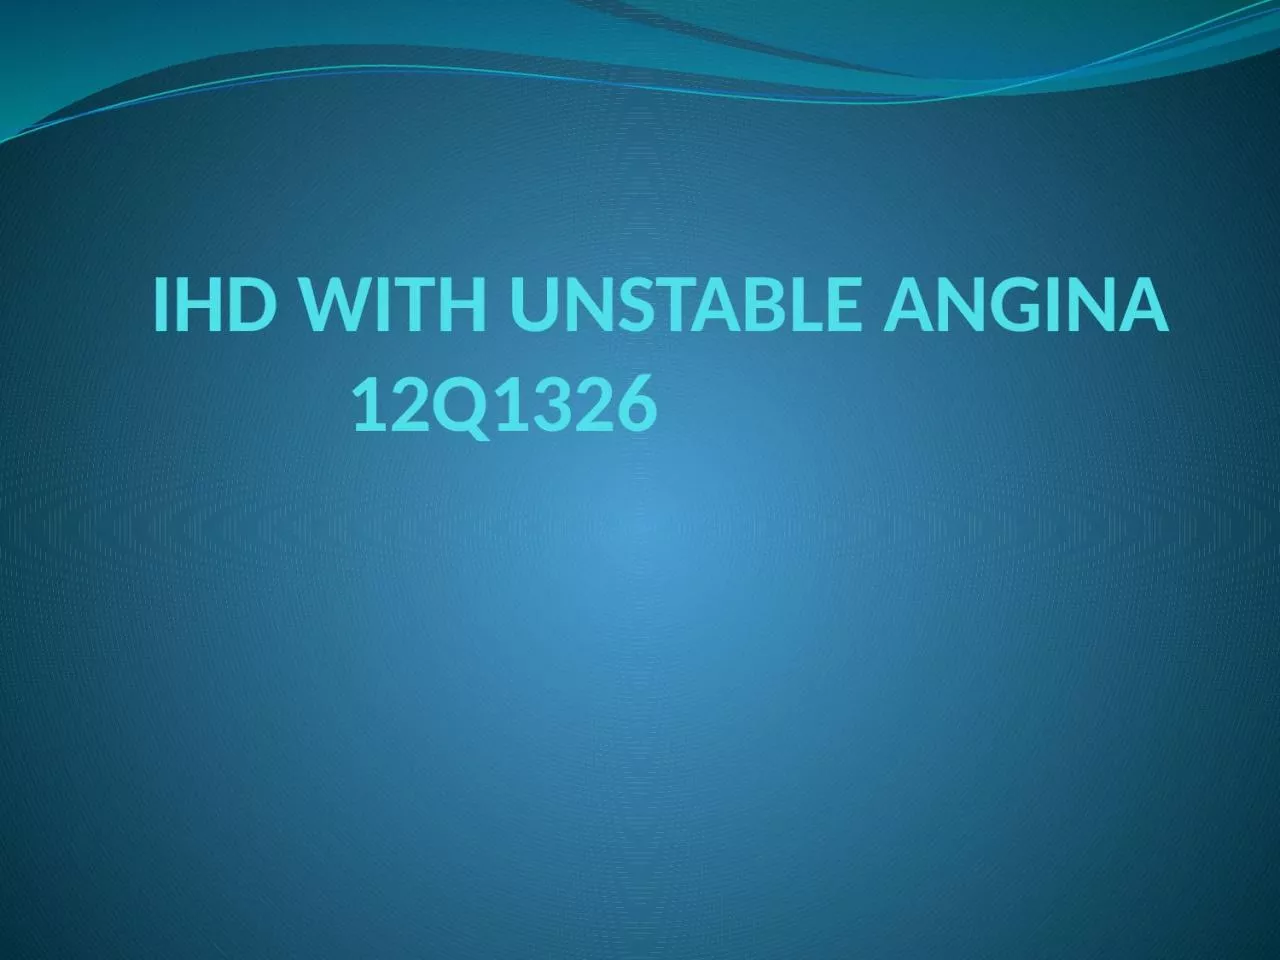 IHD WITH UNSTABLE ANGINA